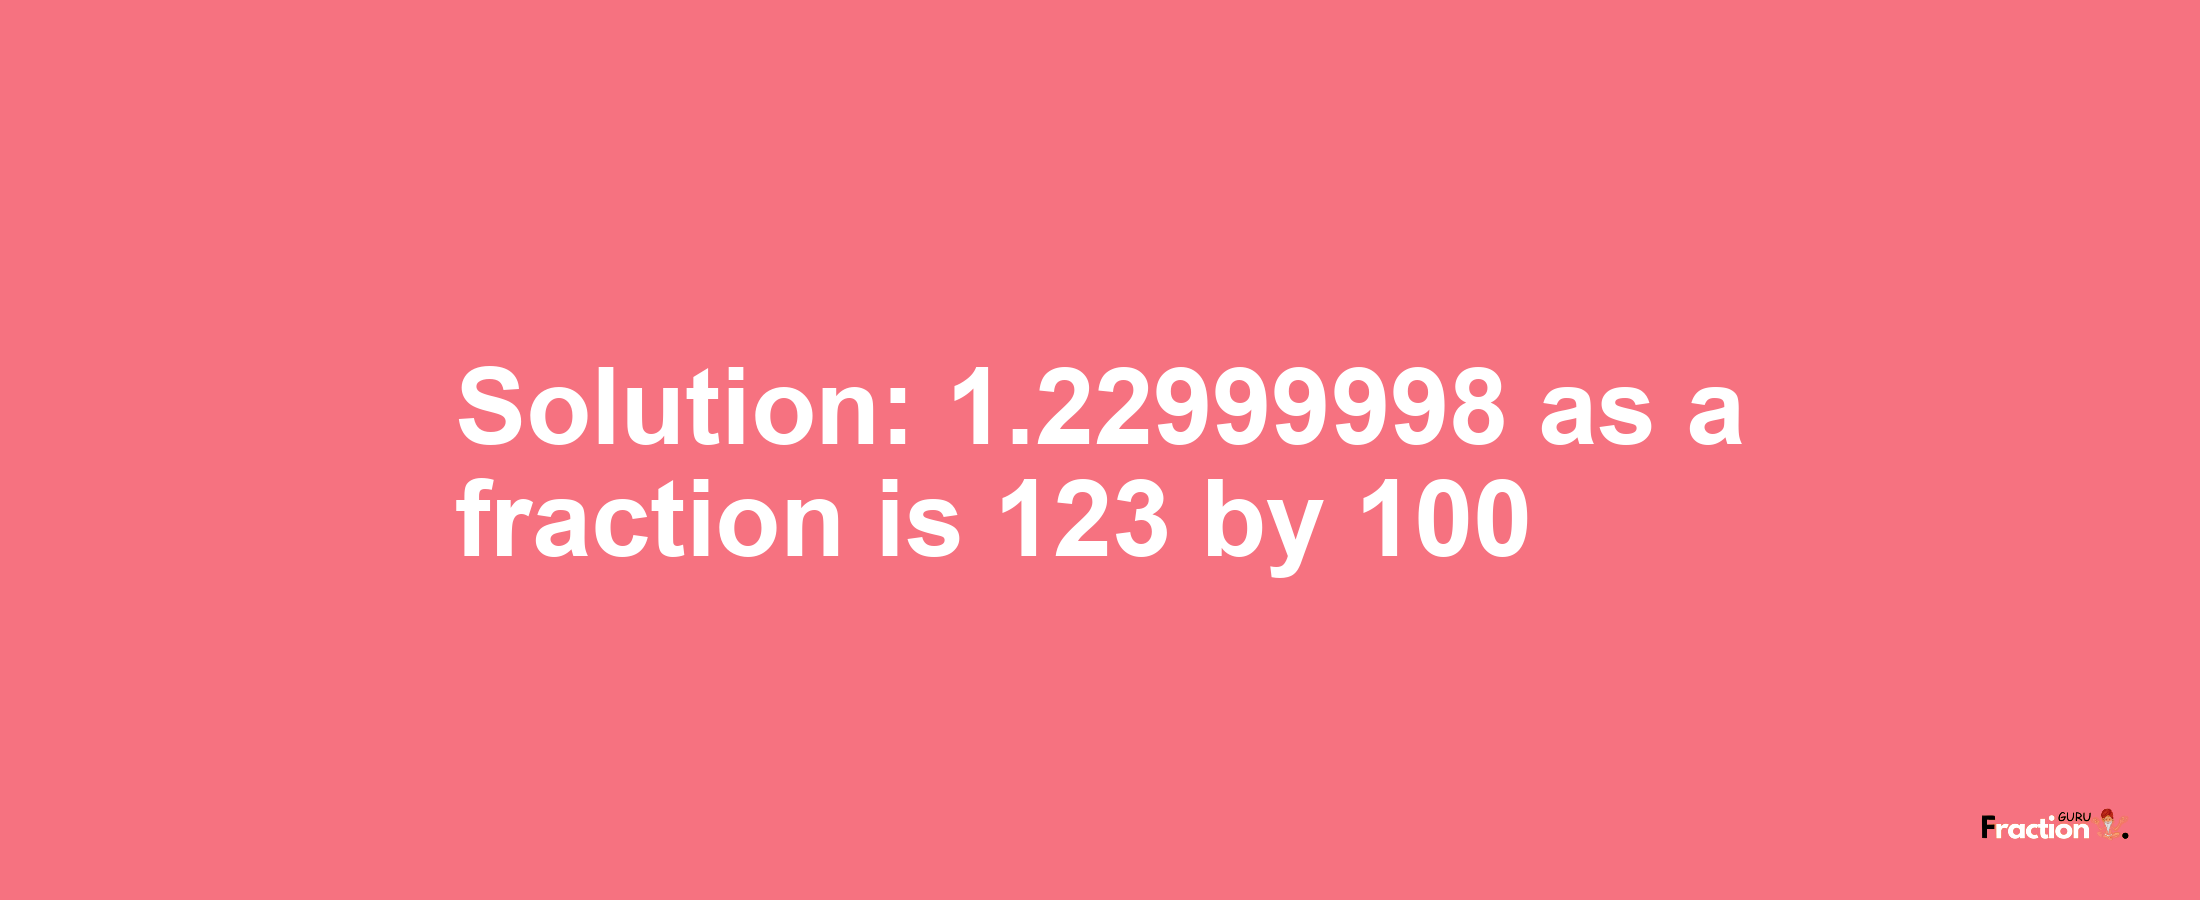 Solution:1.22999998 as a fraction is 123/100